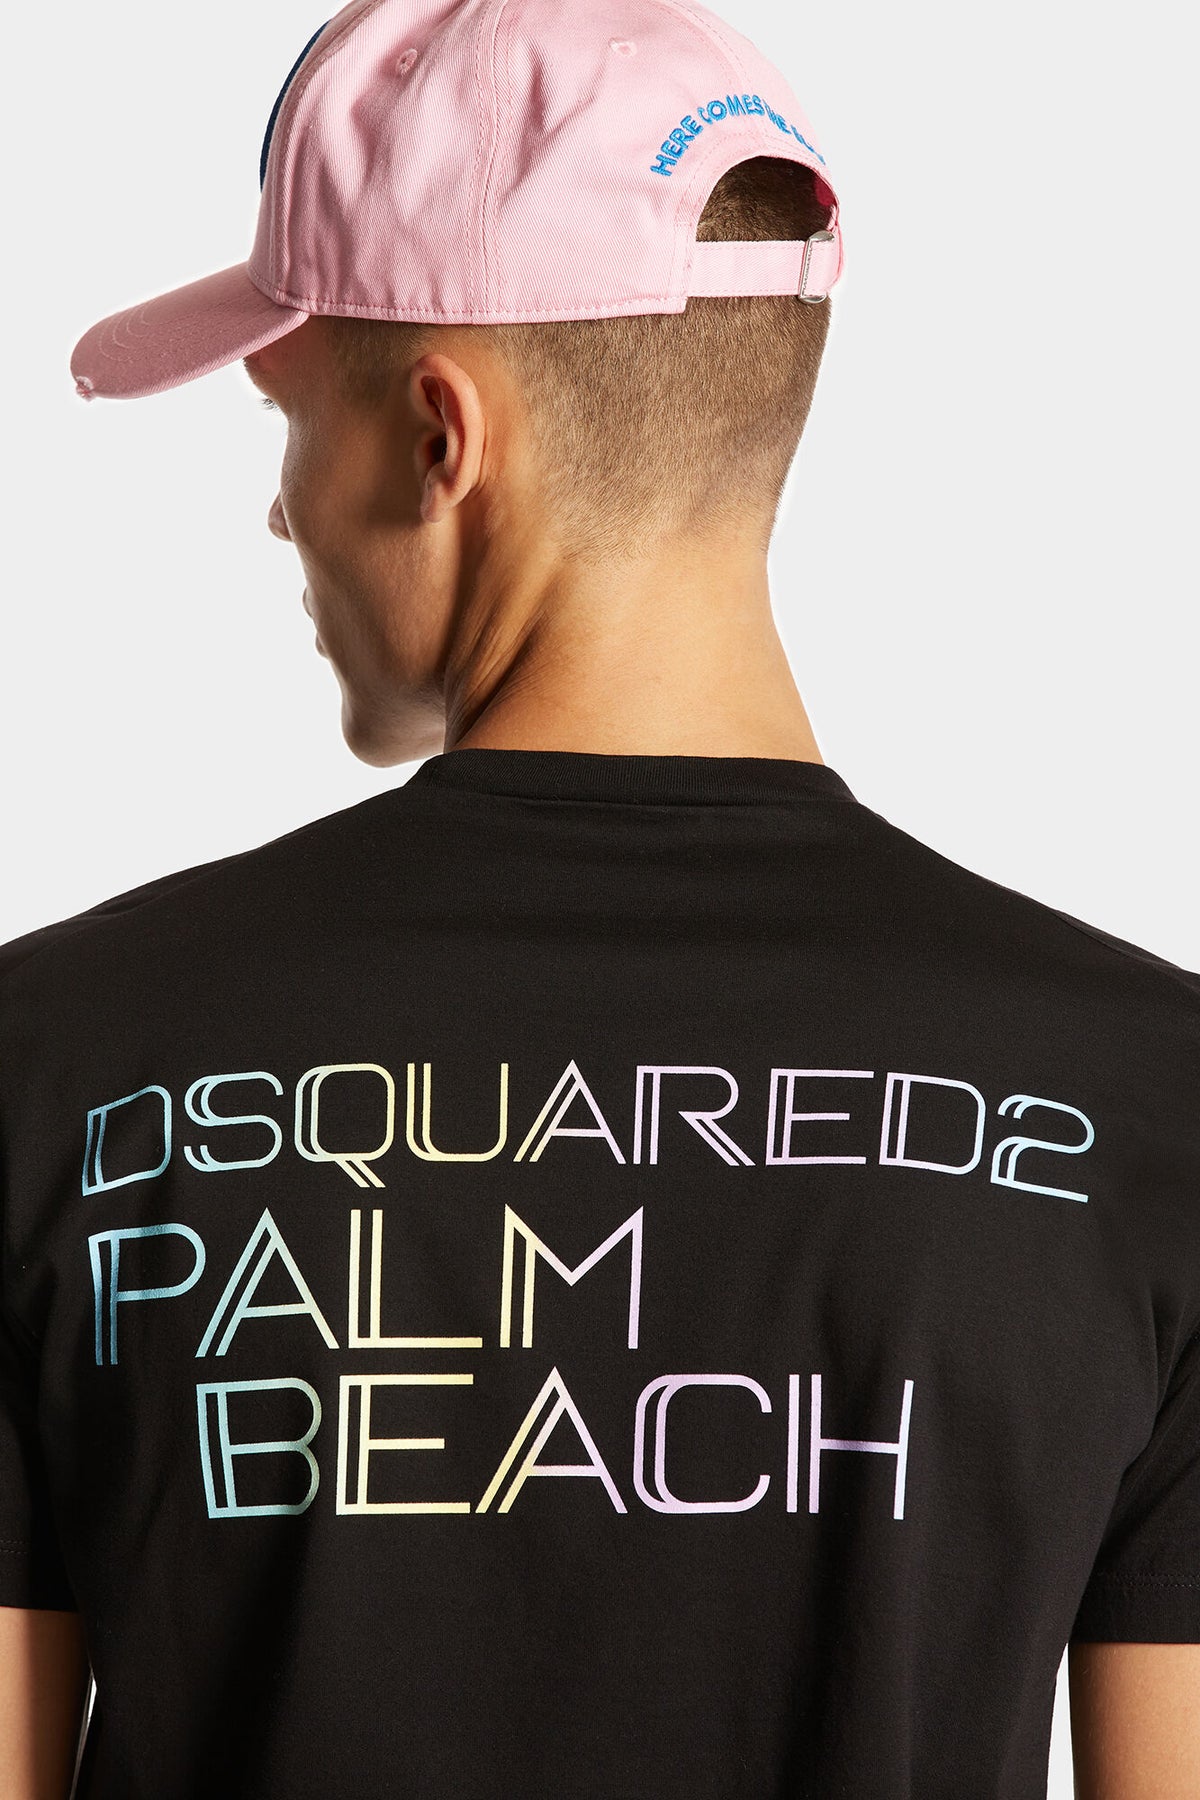 DSQUARED2 PALM BEACH COOL FIT T-SHIRT